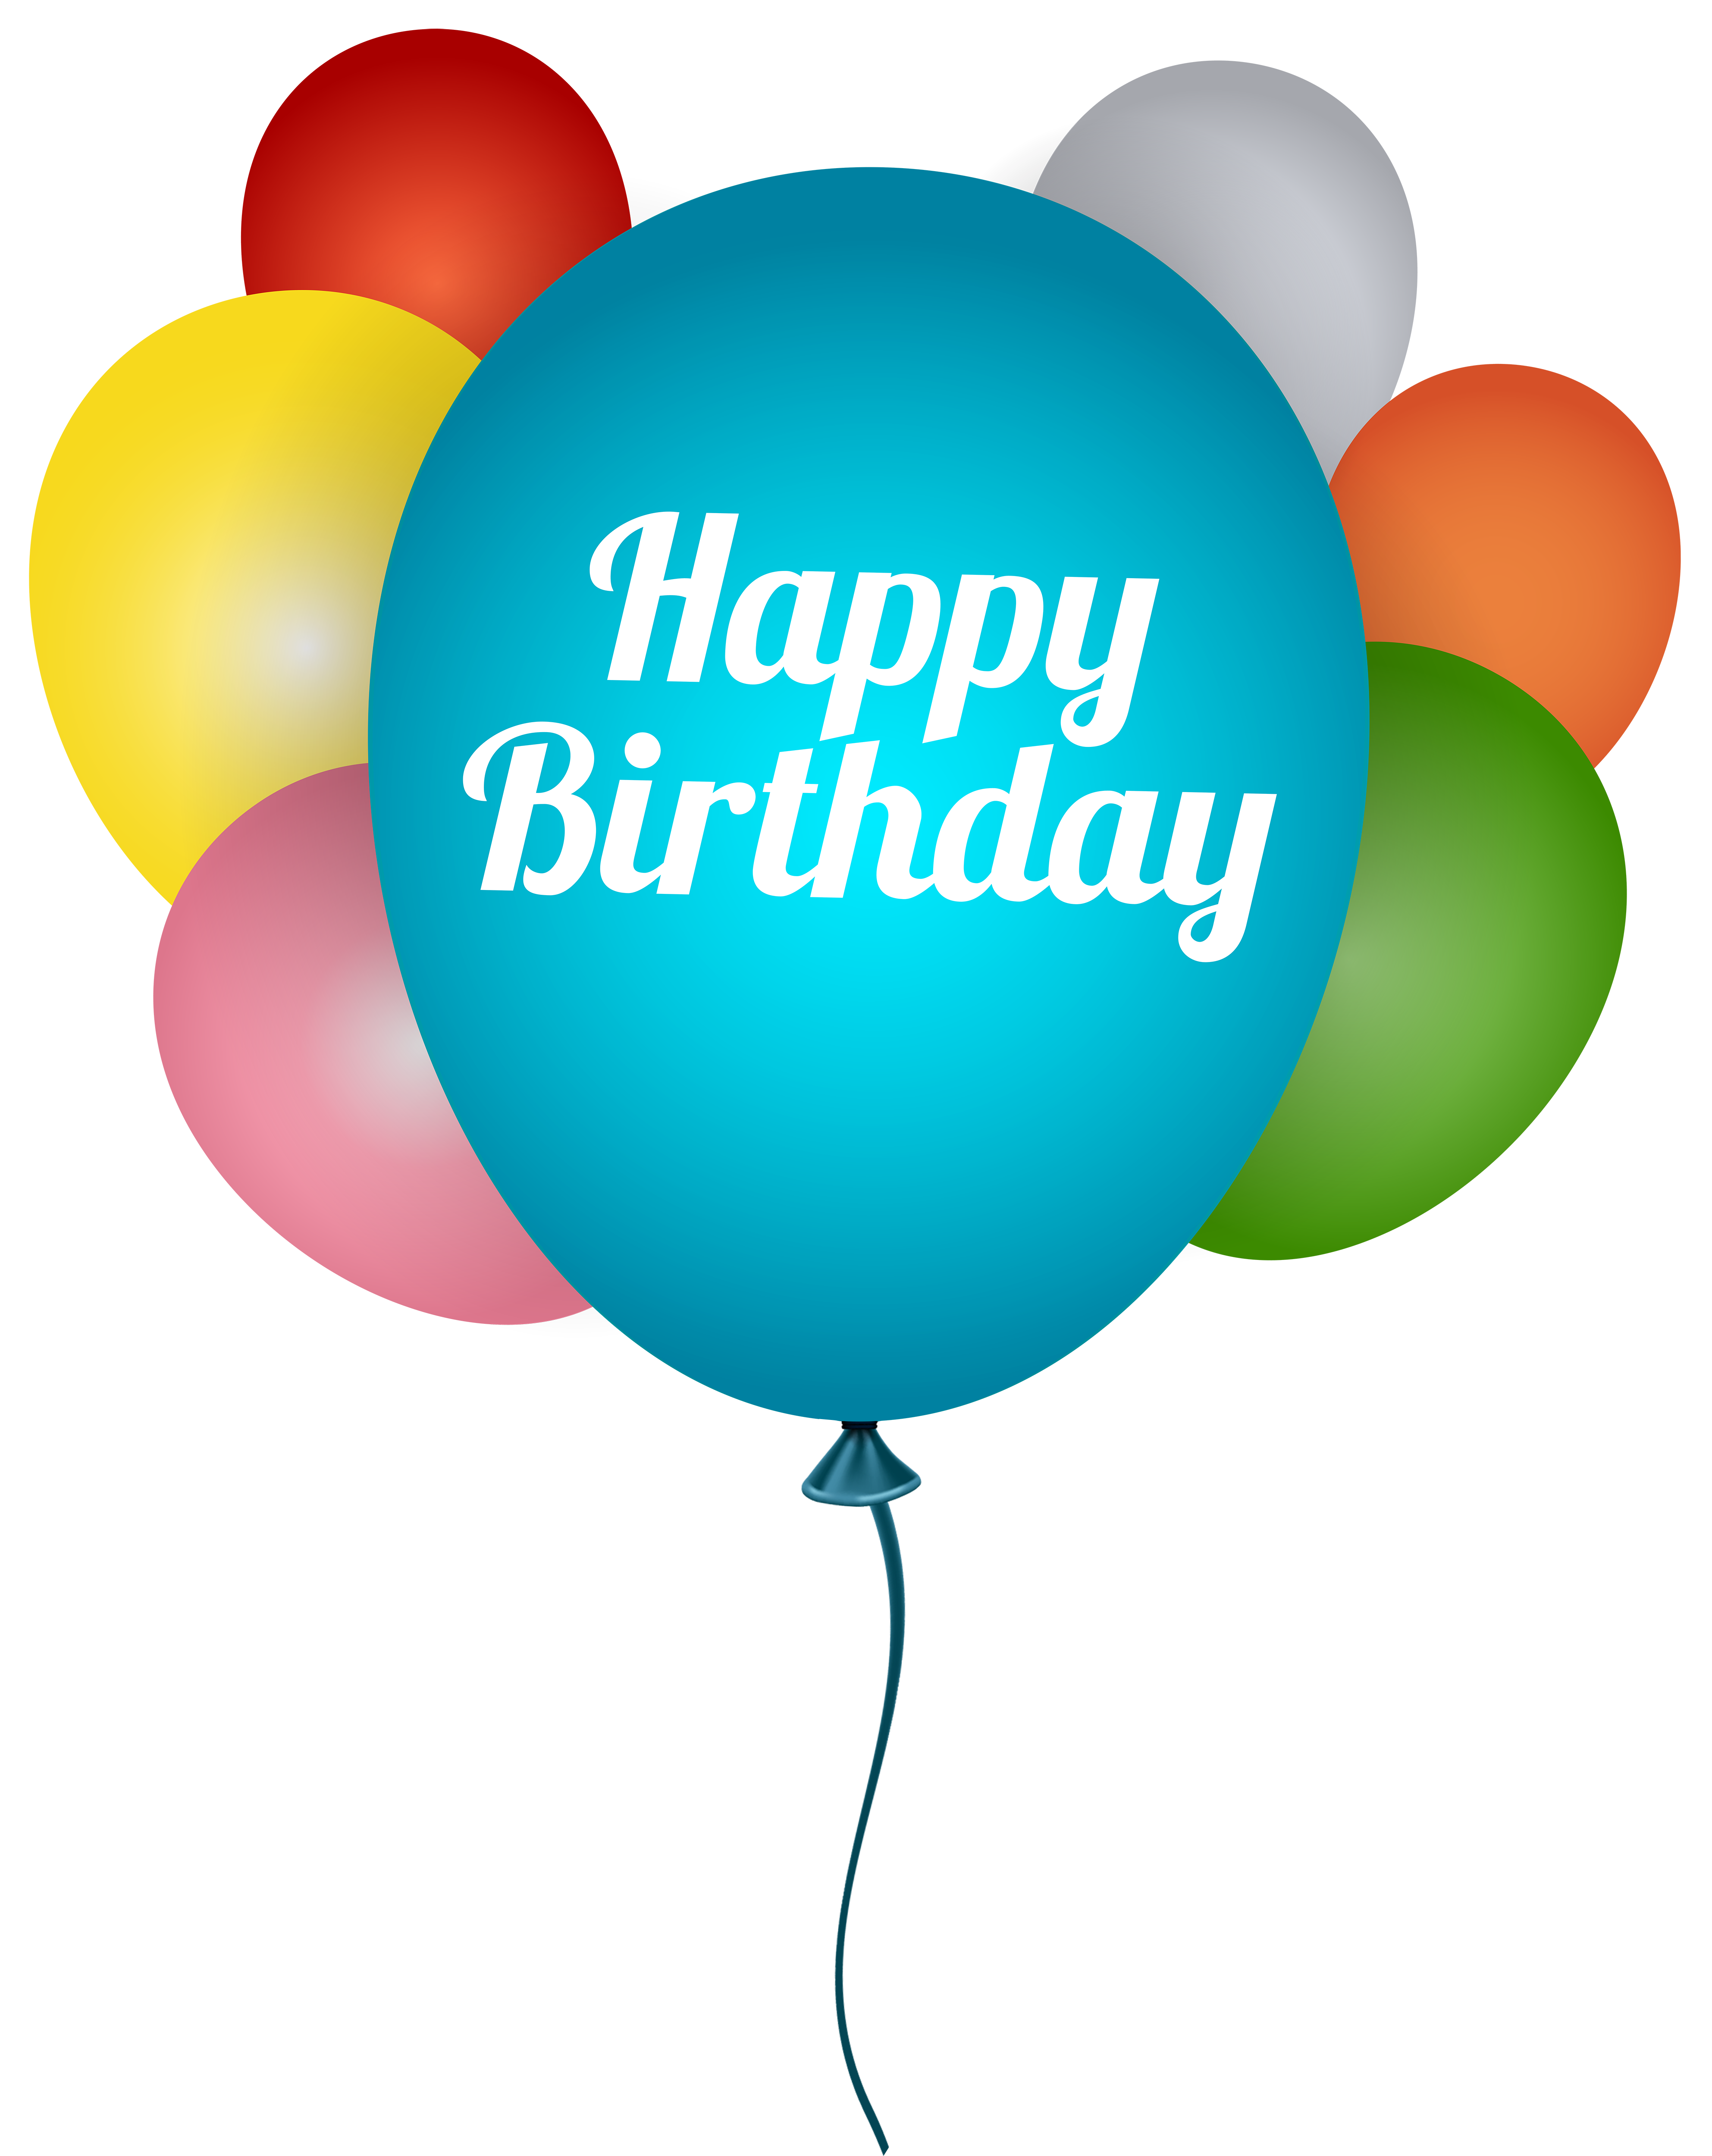 Birthday Cake Wish Greeting Card New Year Happy Birthday Balloons Transparent Png Clip Art Image Png Download 3970 5000 Free Transparent Birthday Png Download Clip Art Library